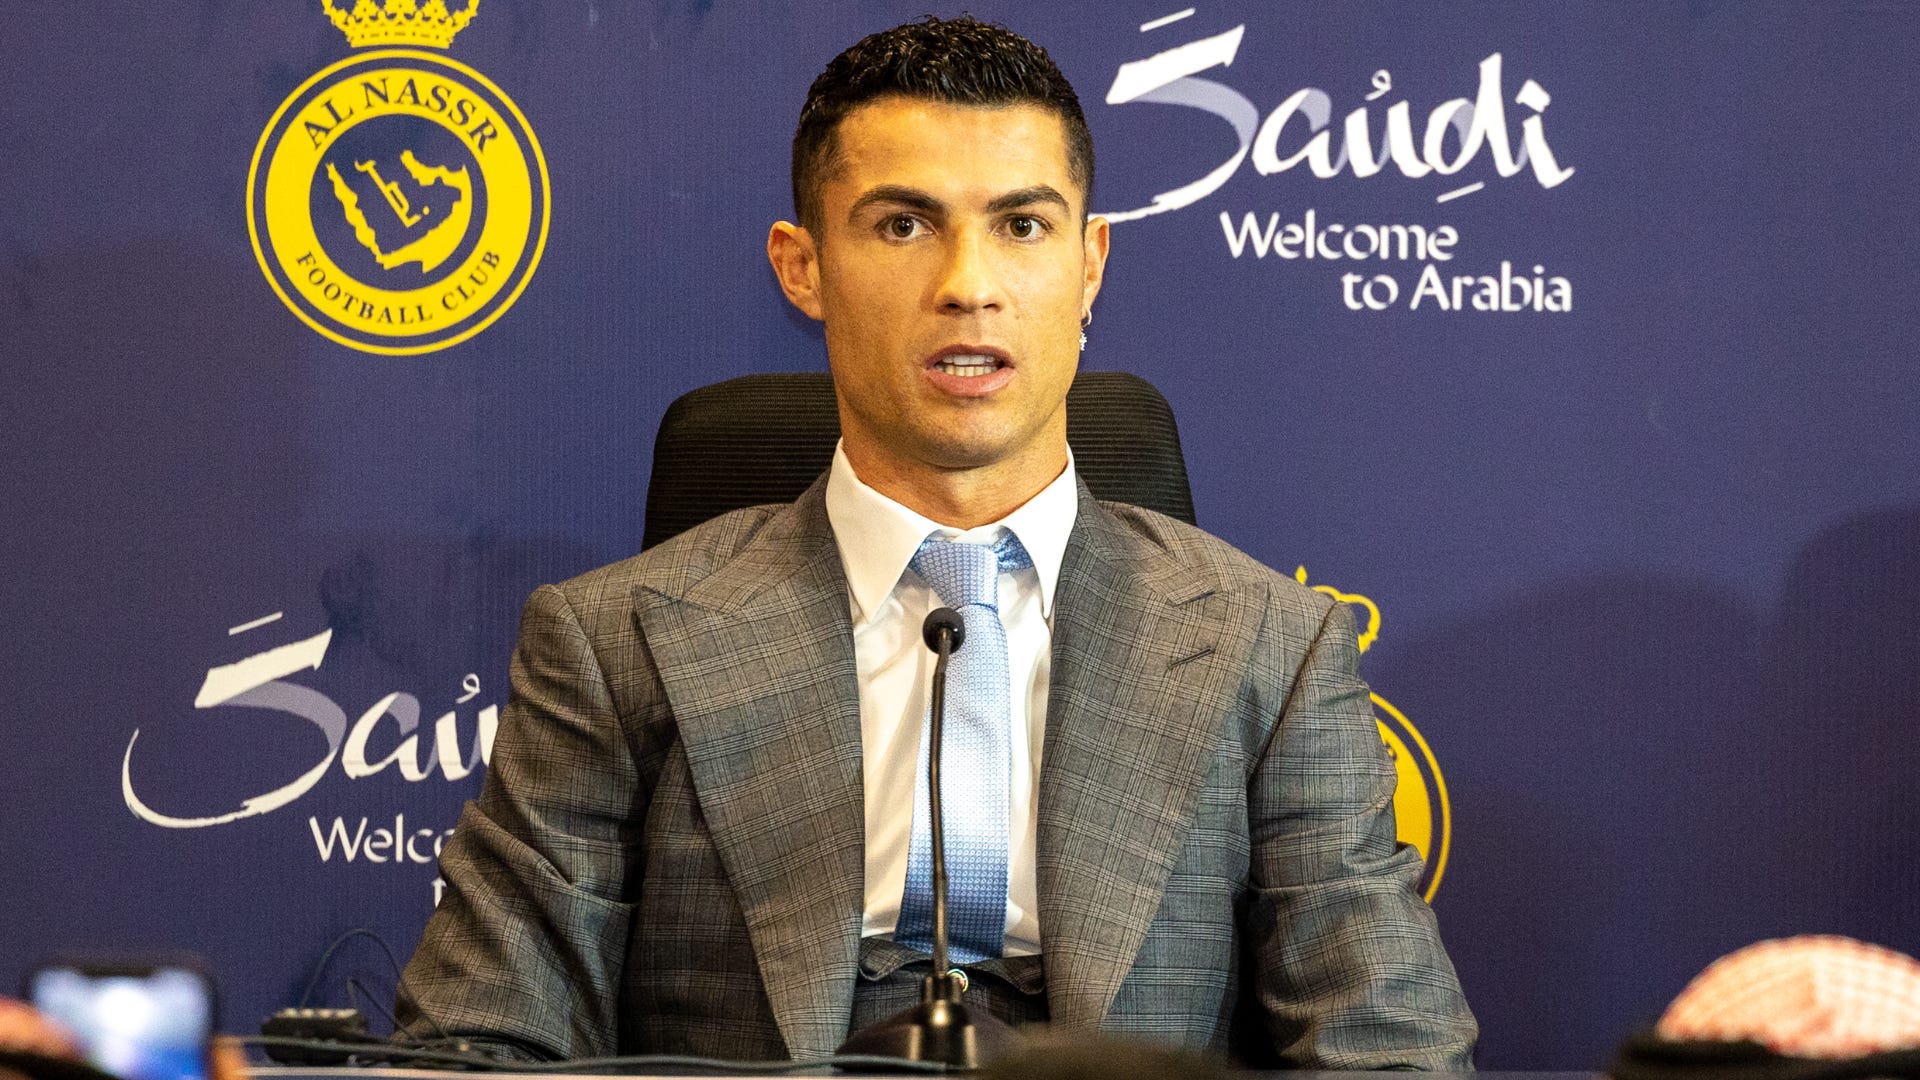 ‘They don’t know anything about football’ – Cristiano Ronaldo hits back at criticism over Al-Nassr transfer